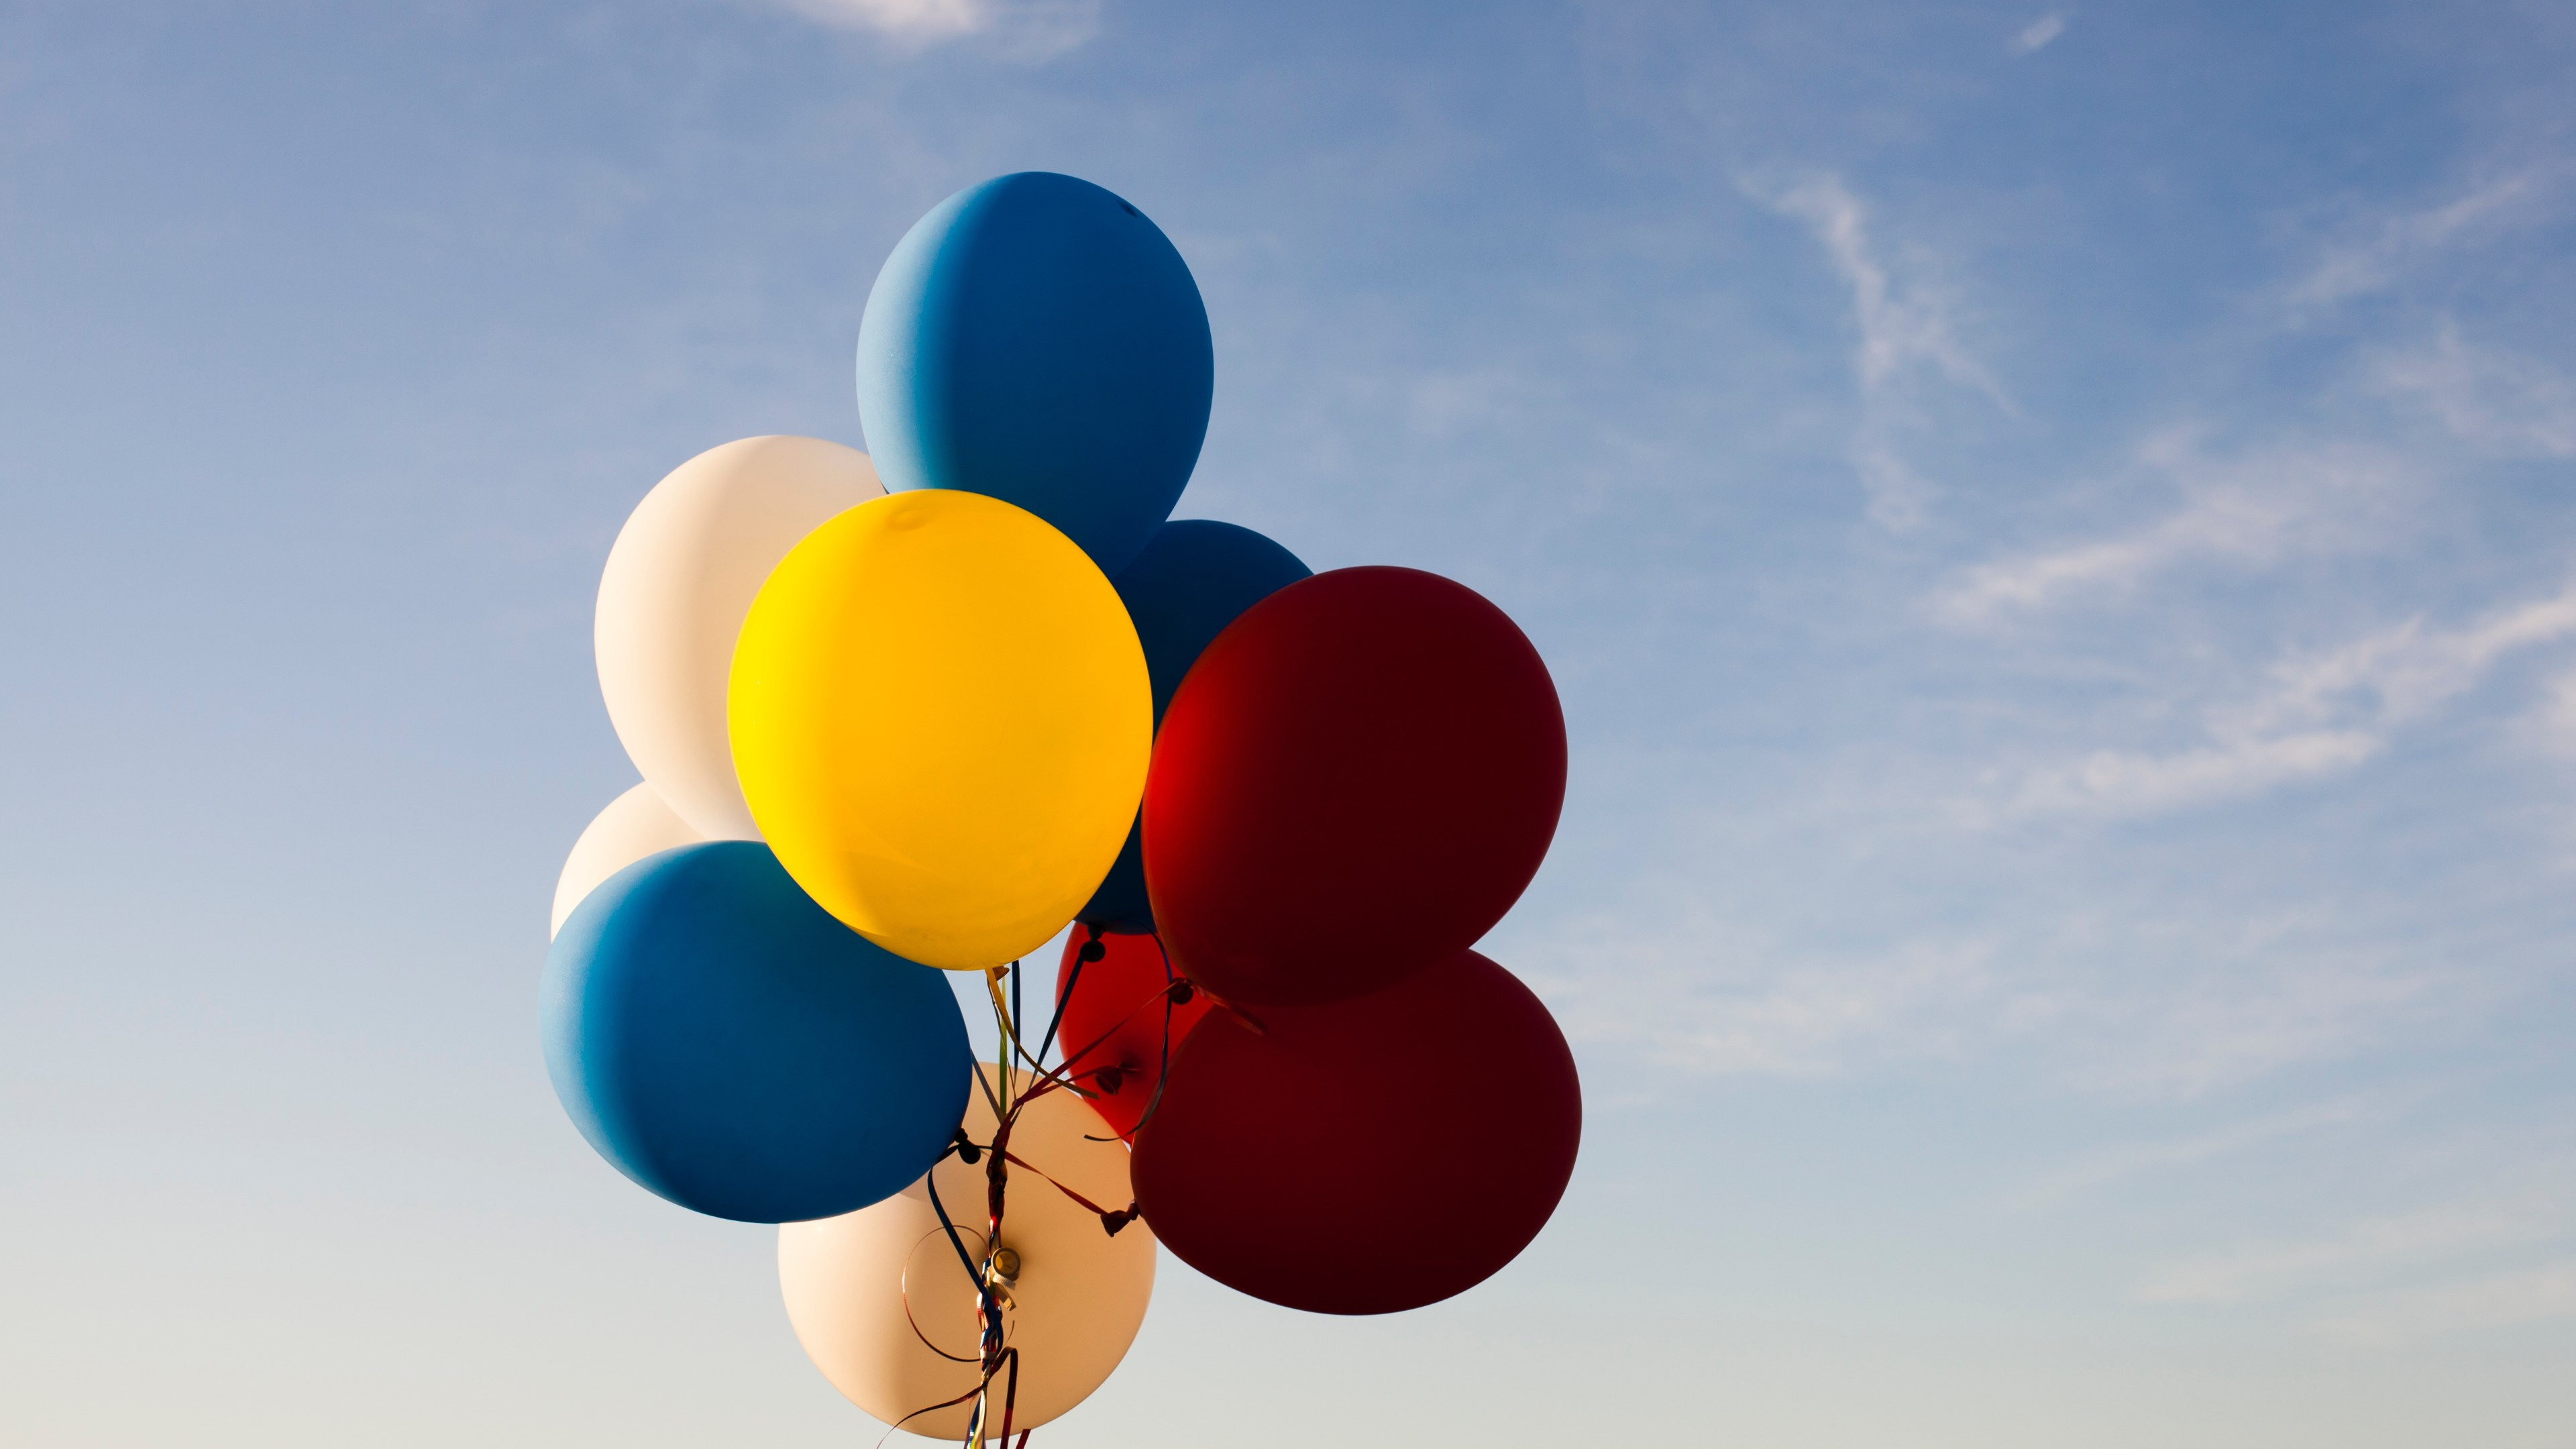 Colored balloons wallpaper 3840x2160